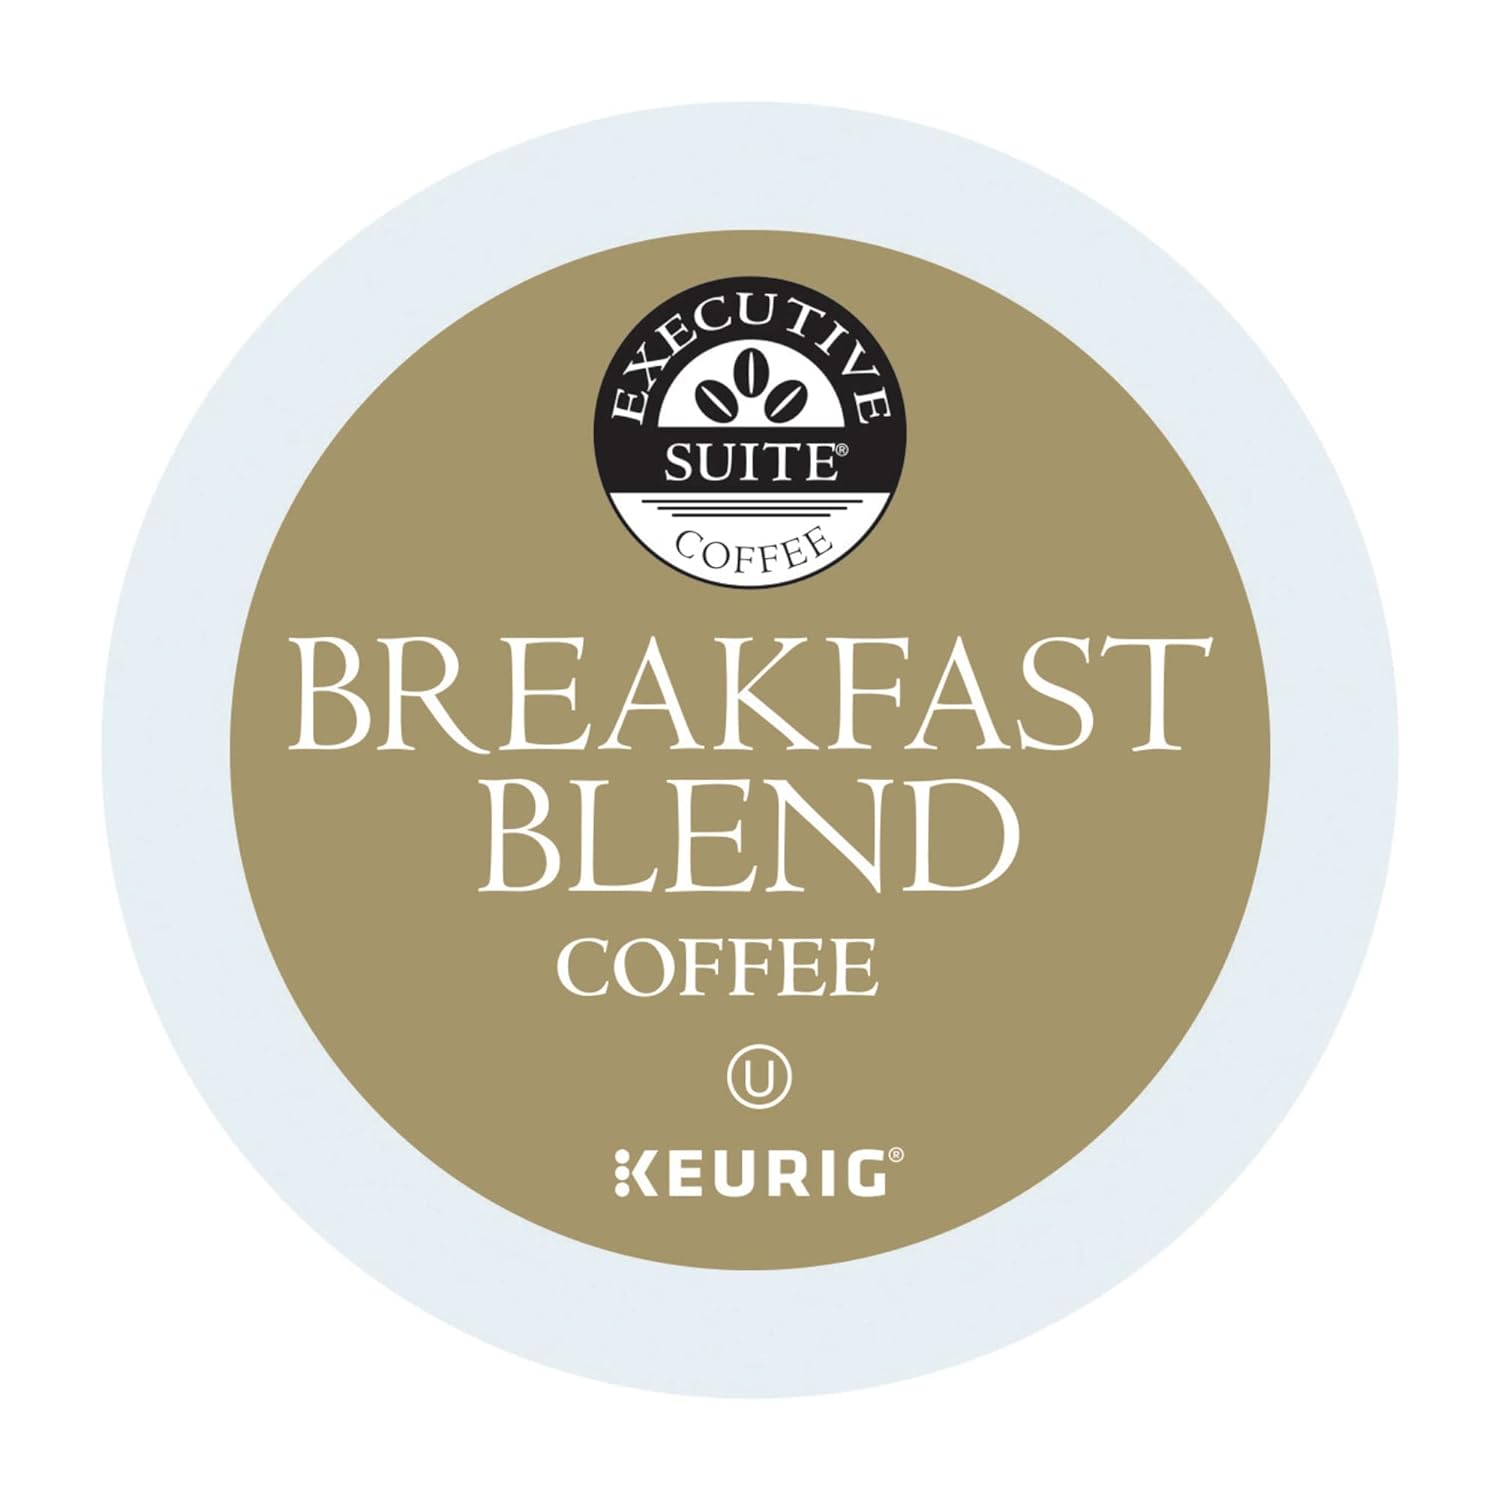 Executive Suite Breakfast Blend Coffee Keurig® K-Cup® Pods, Box of 70 Pods